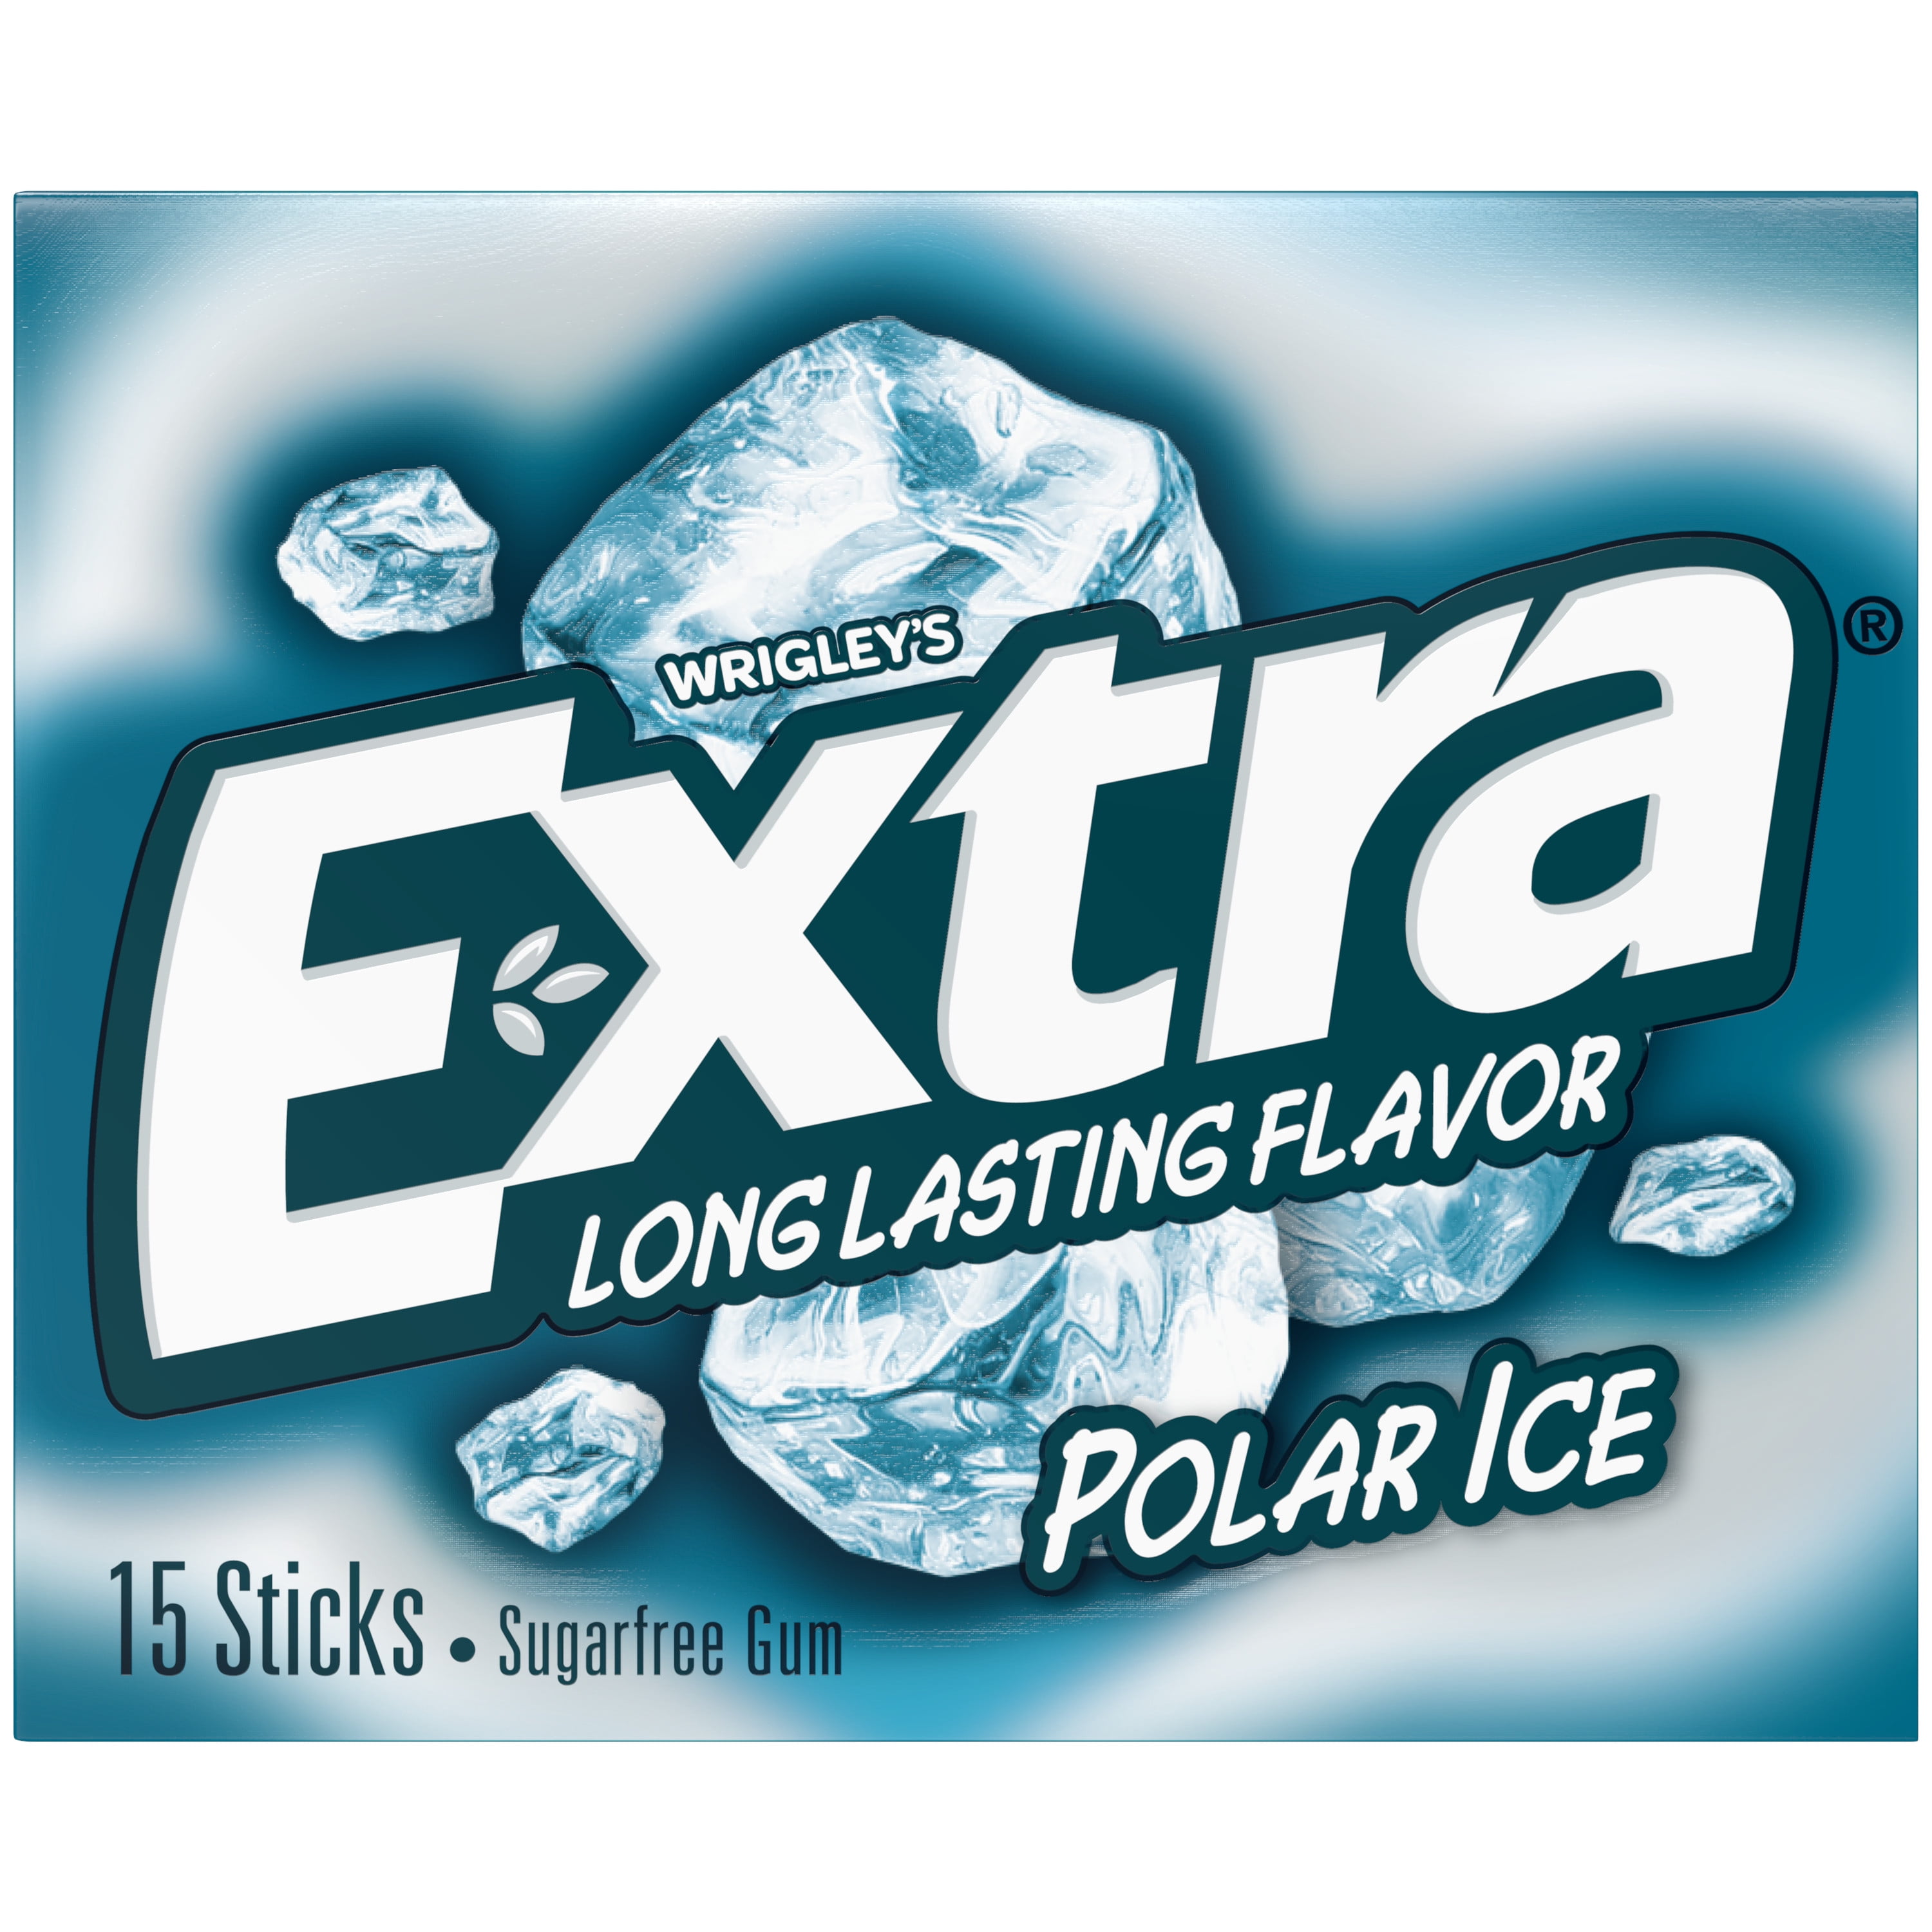 EXTRA Spearmint Sugarfree Chewing Gum, 15-Stick Single Pack